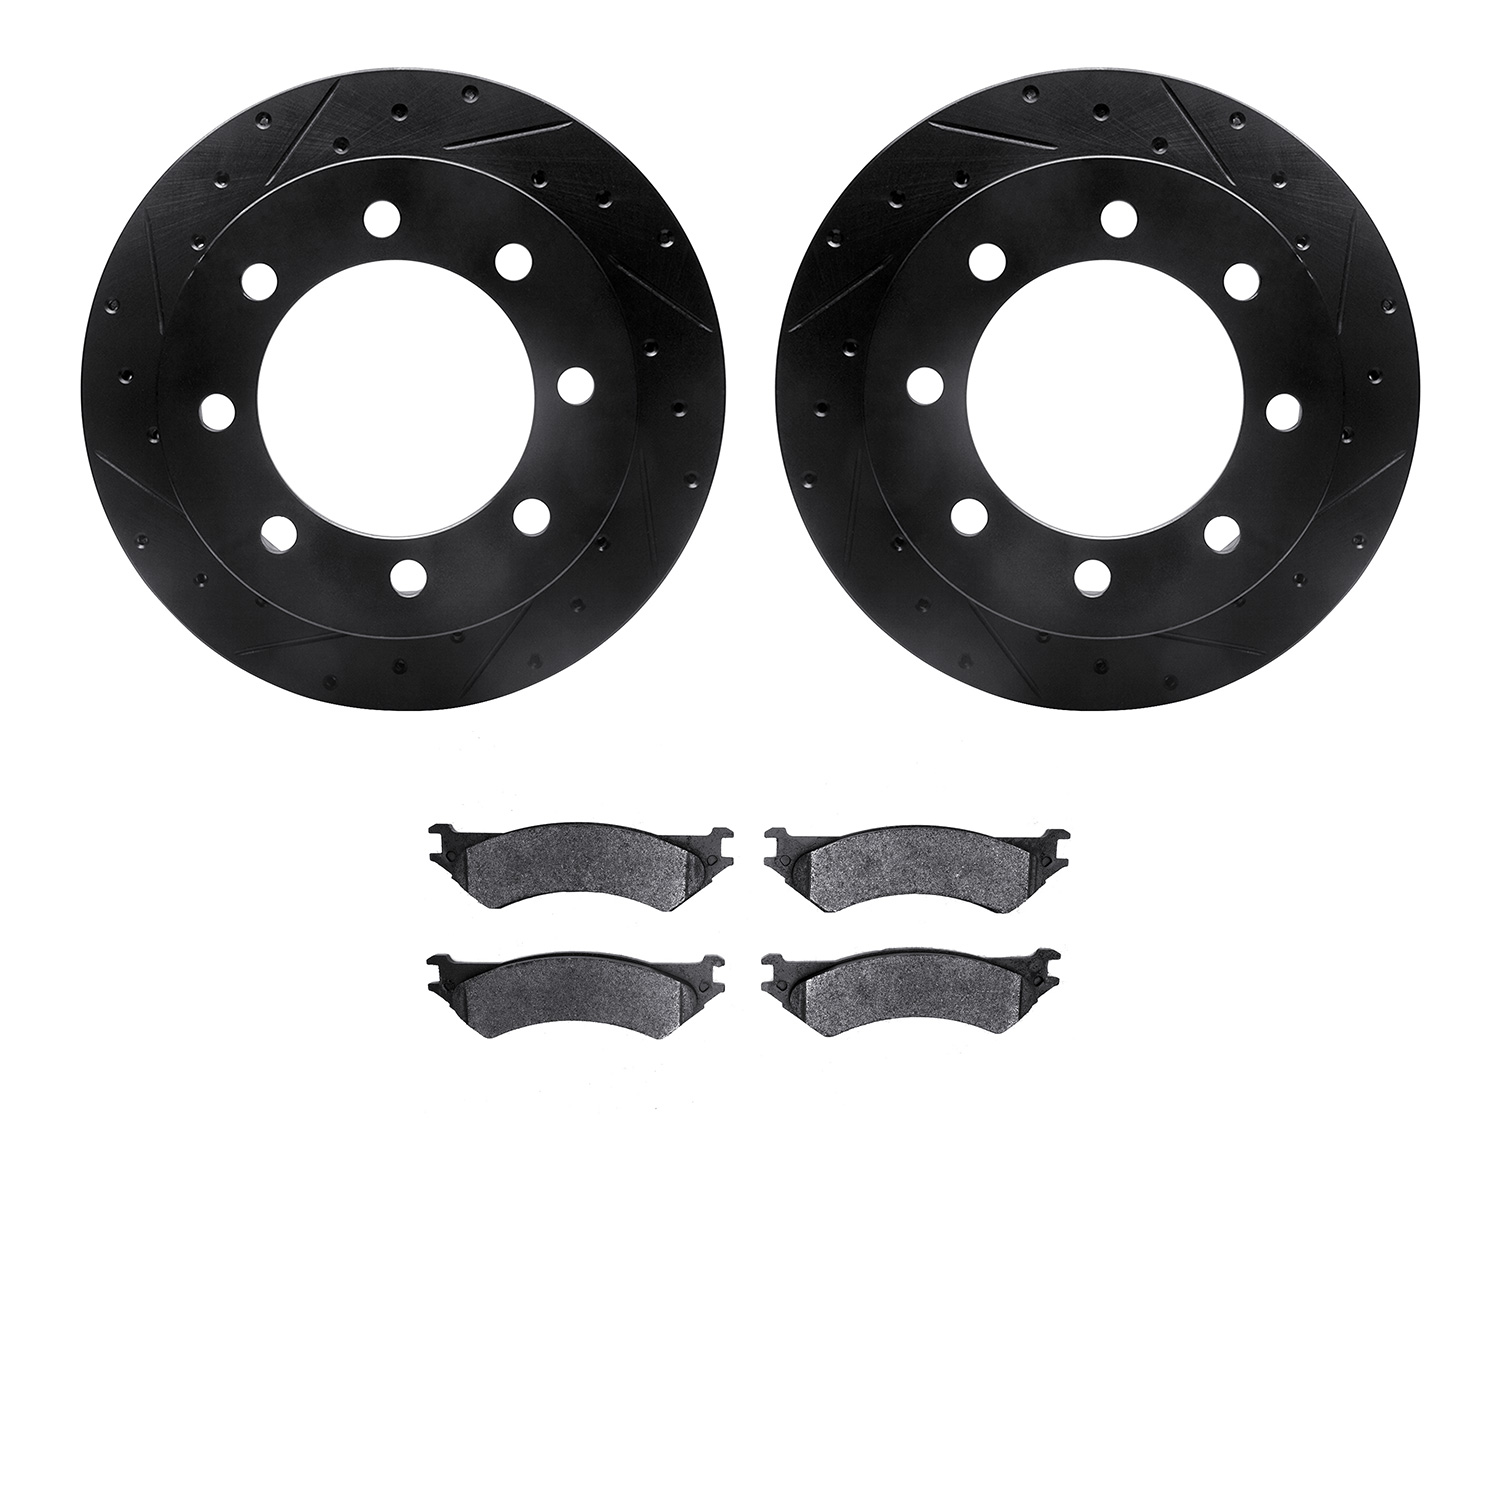 8402-54054 Drilled/Slotted Brake Rotors with Ultimate-Duty Brake Pads Kit [Black], 1999-2007 Ford/Lincoln/Mercury/Mazda, Positio